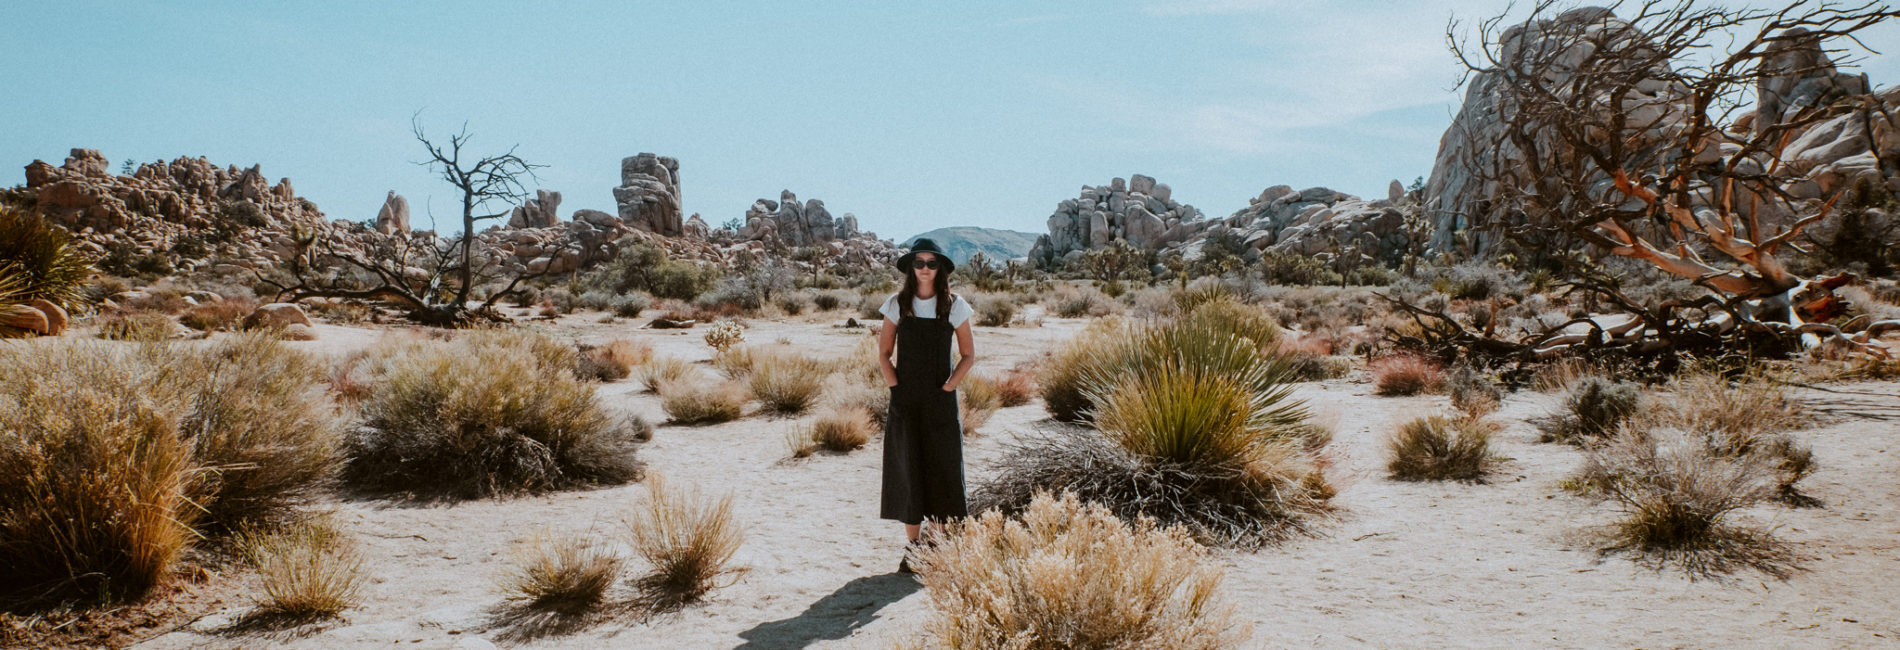 The Ultimate Guide to Spending 24 Hours in Joshua Tree National Park